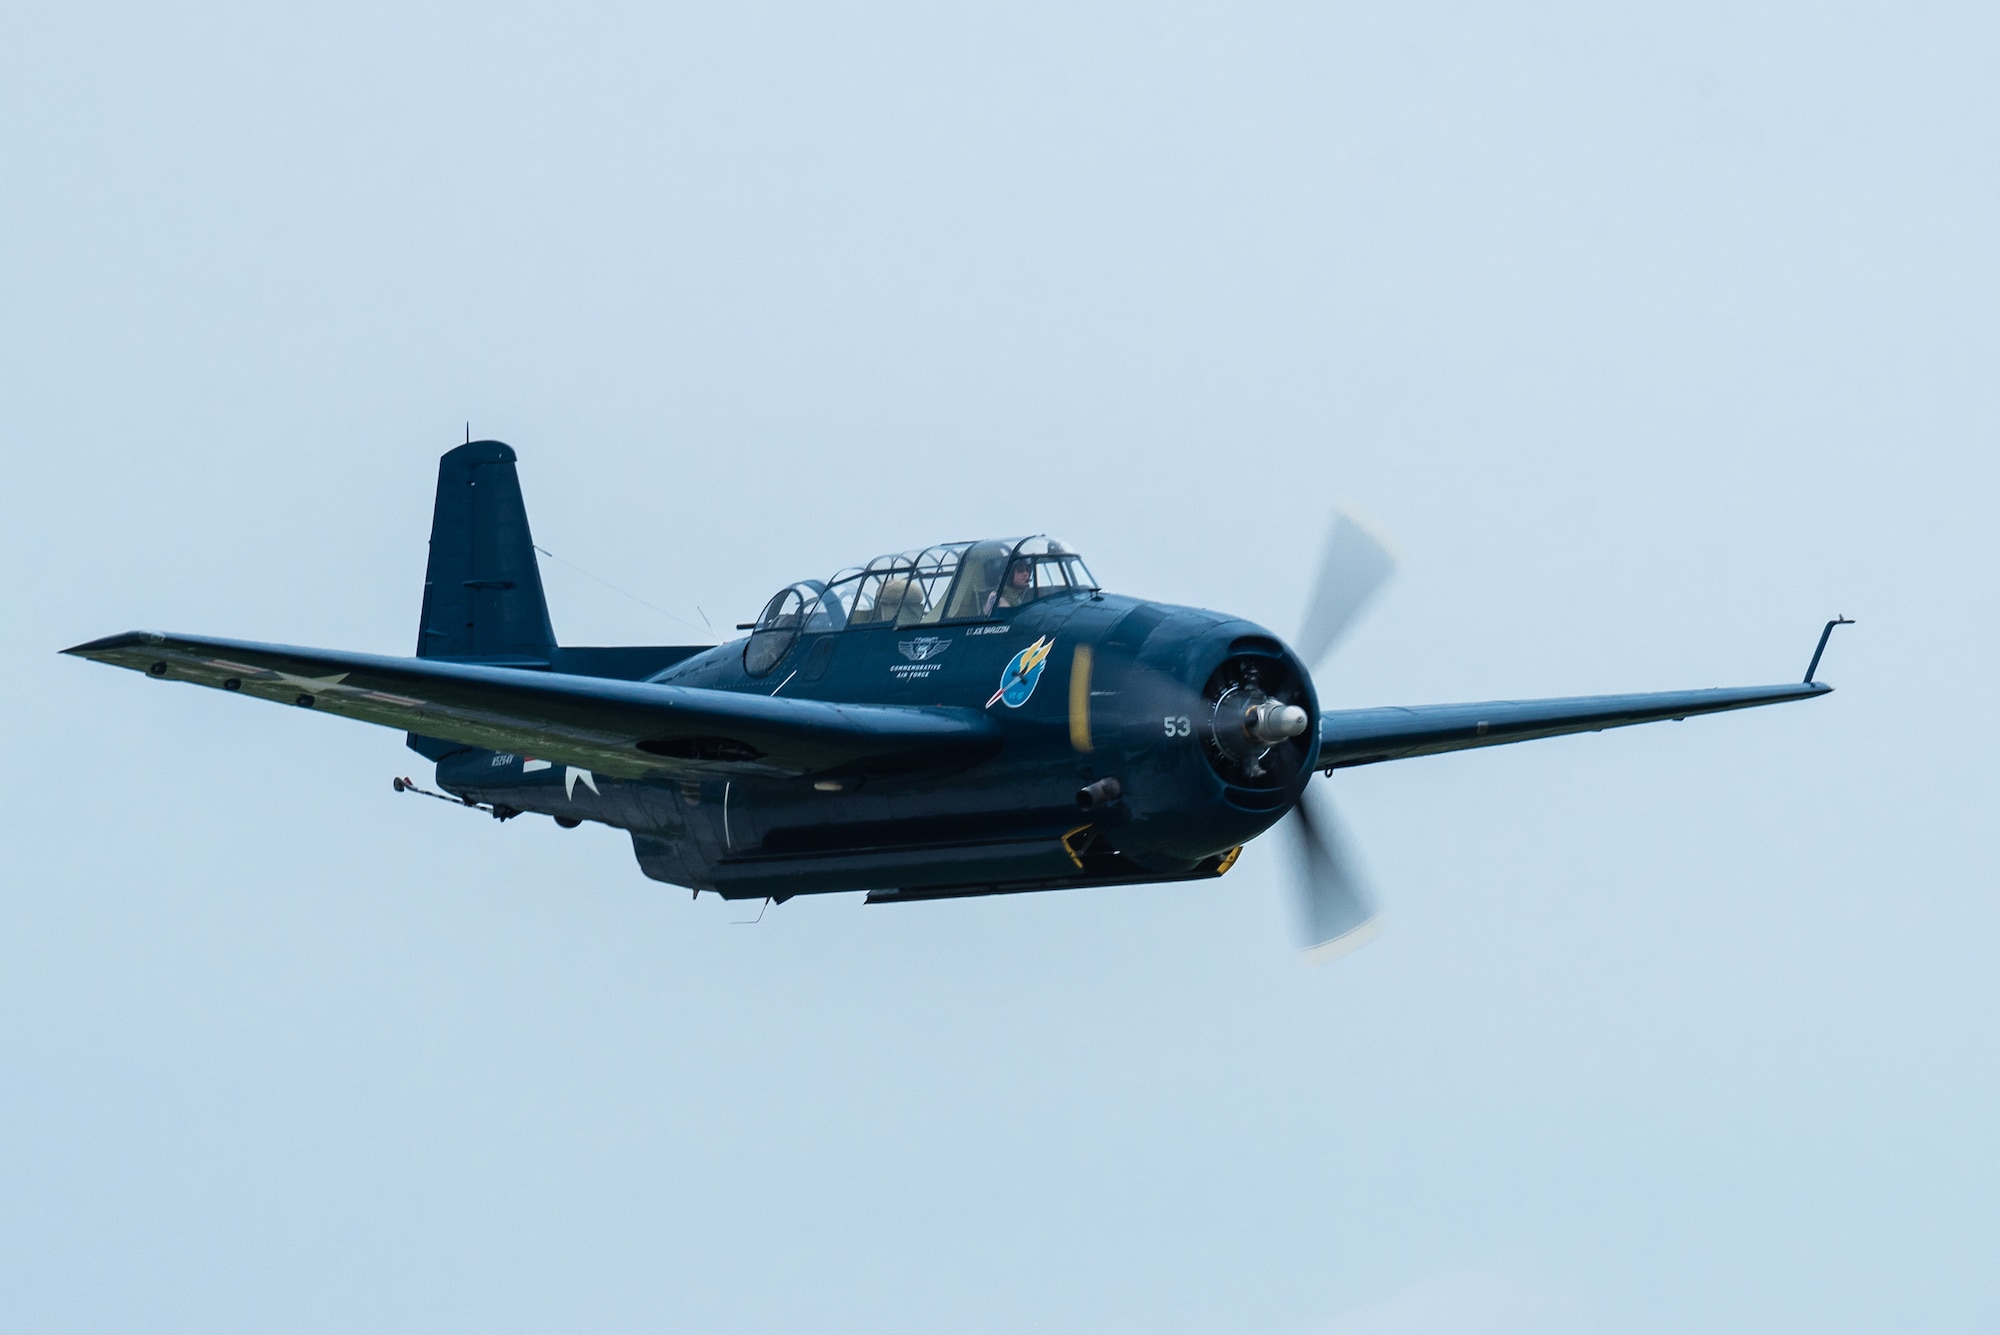 A TBM-3E Avenger from the Commemorative Air Force performs an aerial demonstration over Bowman Field in Louisville, Ky., April 17, 2021, as part of the Thunder Over Louisville air show. The annual event featured more than 20 military and civilian air craft this year. (U.S. Air National Guard photo by Dale Greer)